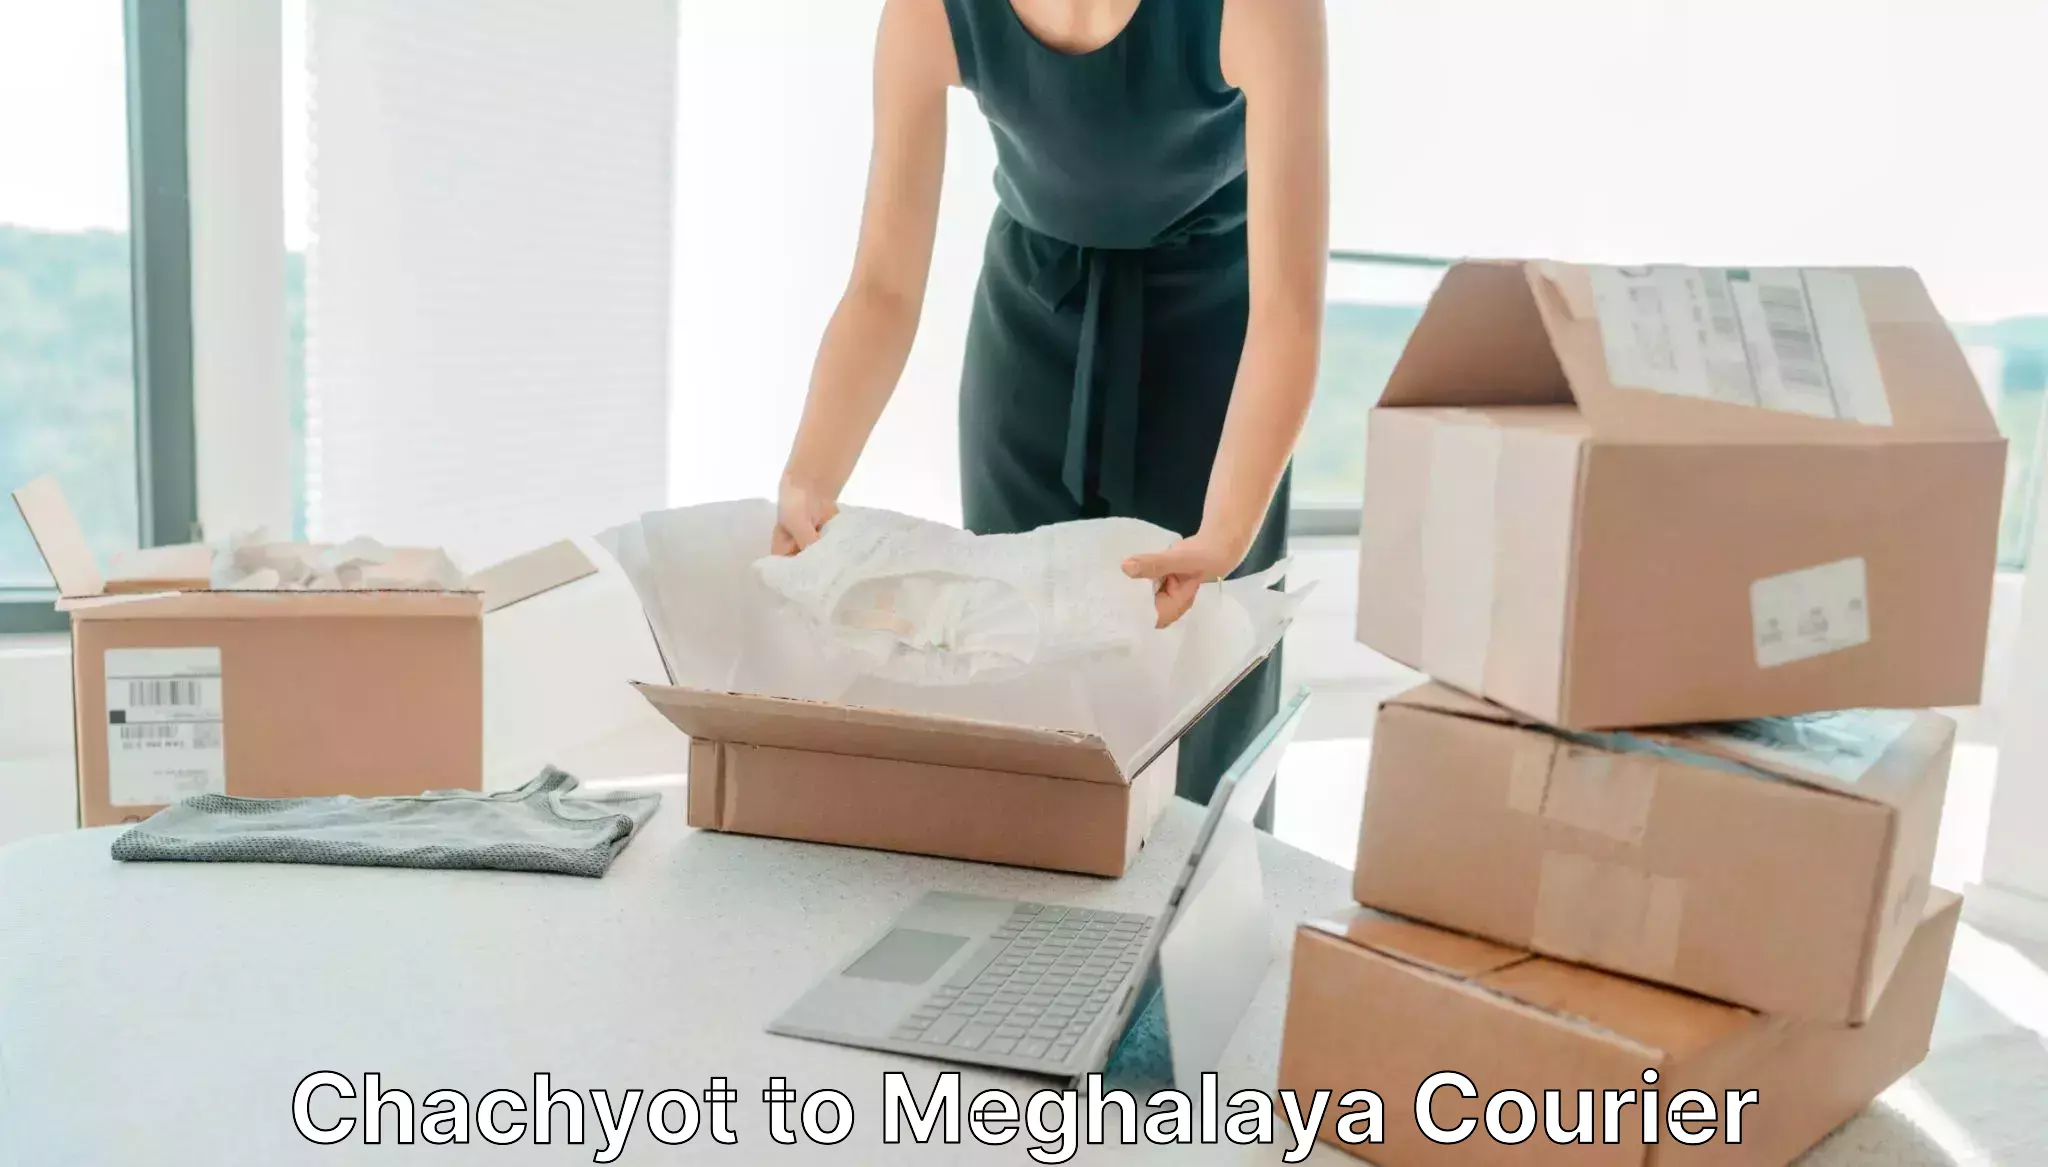 Efficient order fulfillment Chachyot to Tura